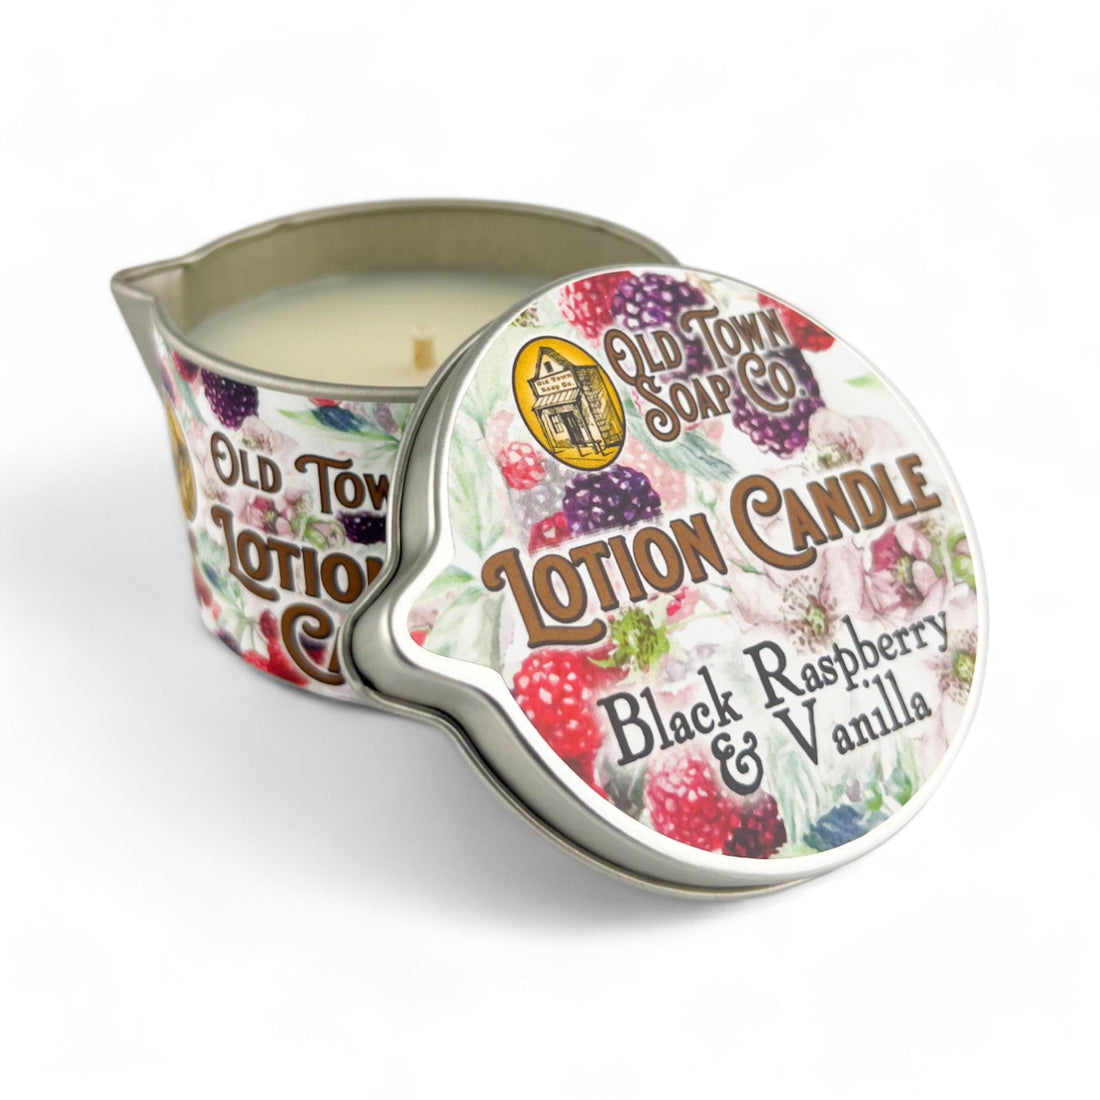 Black Raspberry &amp; Vanilla -Lotion Candles - Old Town Soap Co.